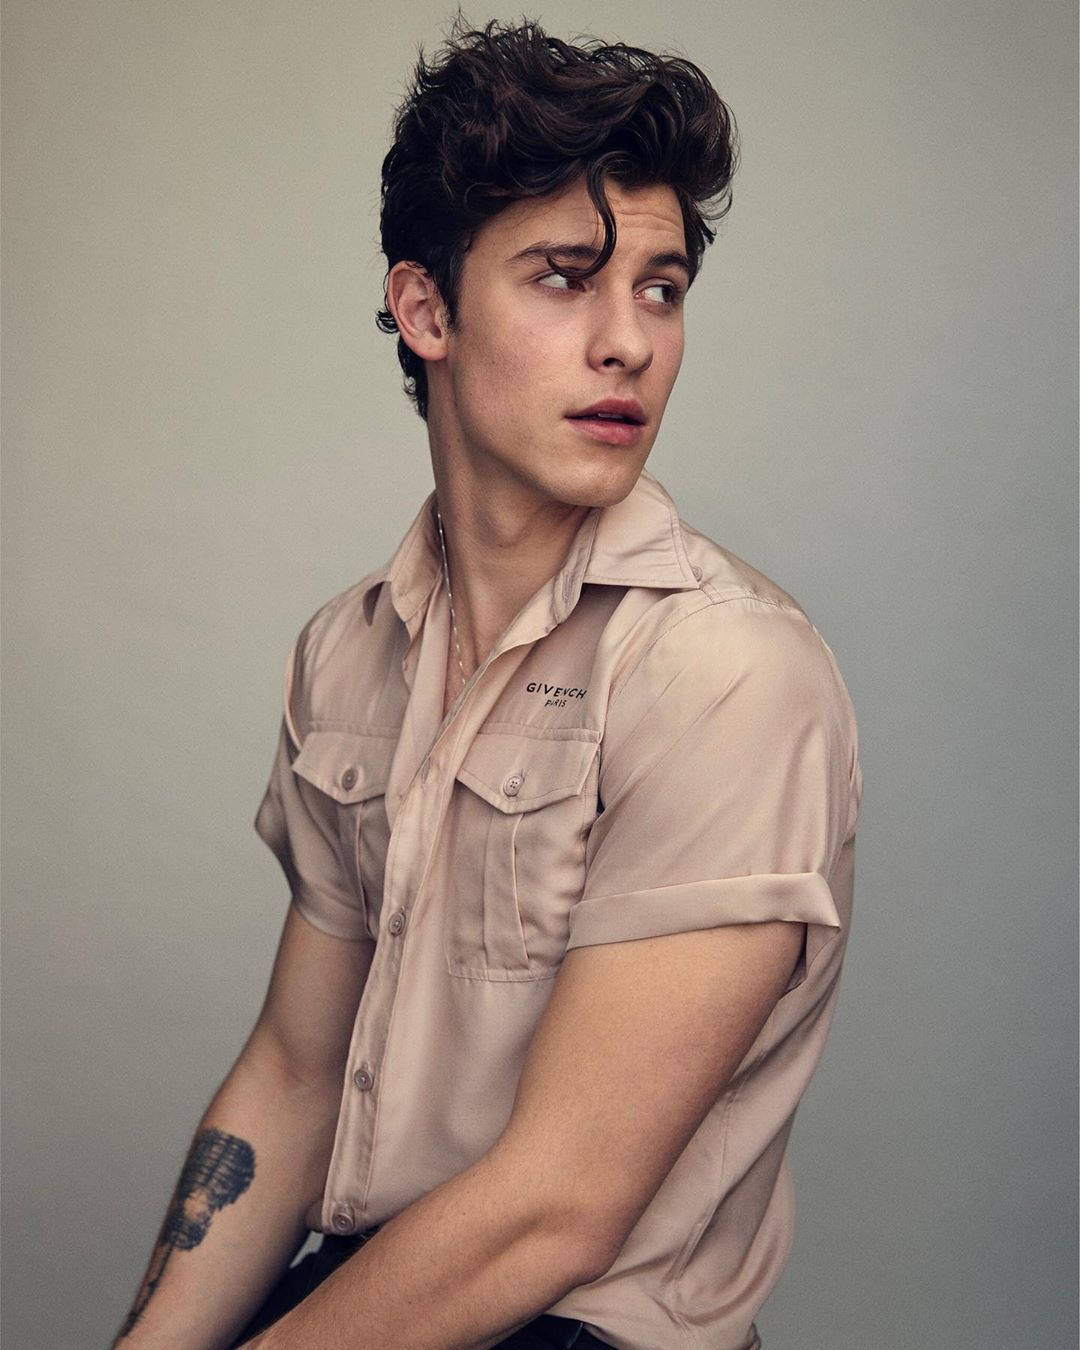 Shawn Mendes in a beige shirt and black pants - Shawn Mendes